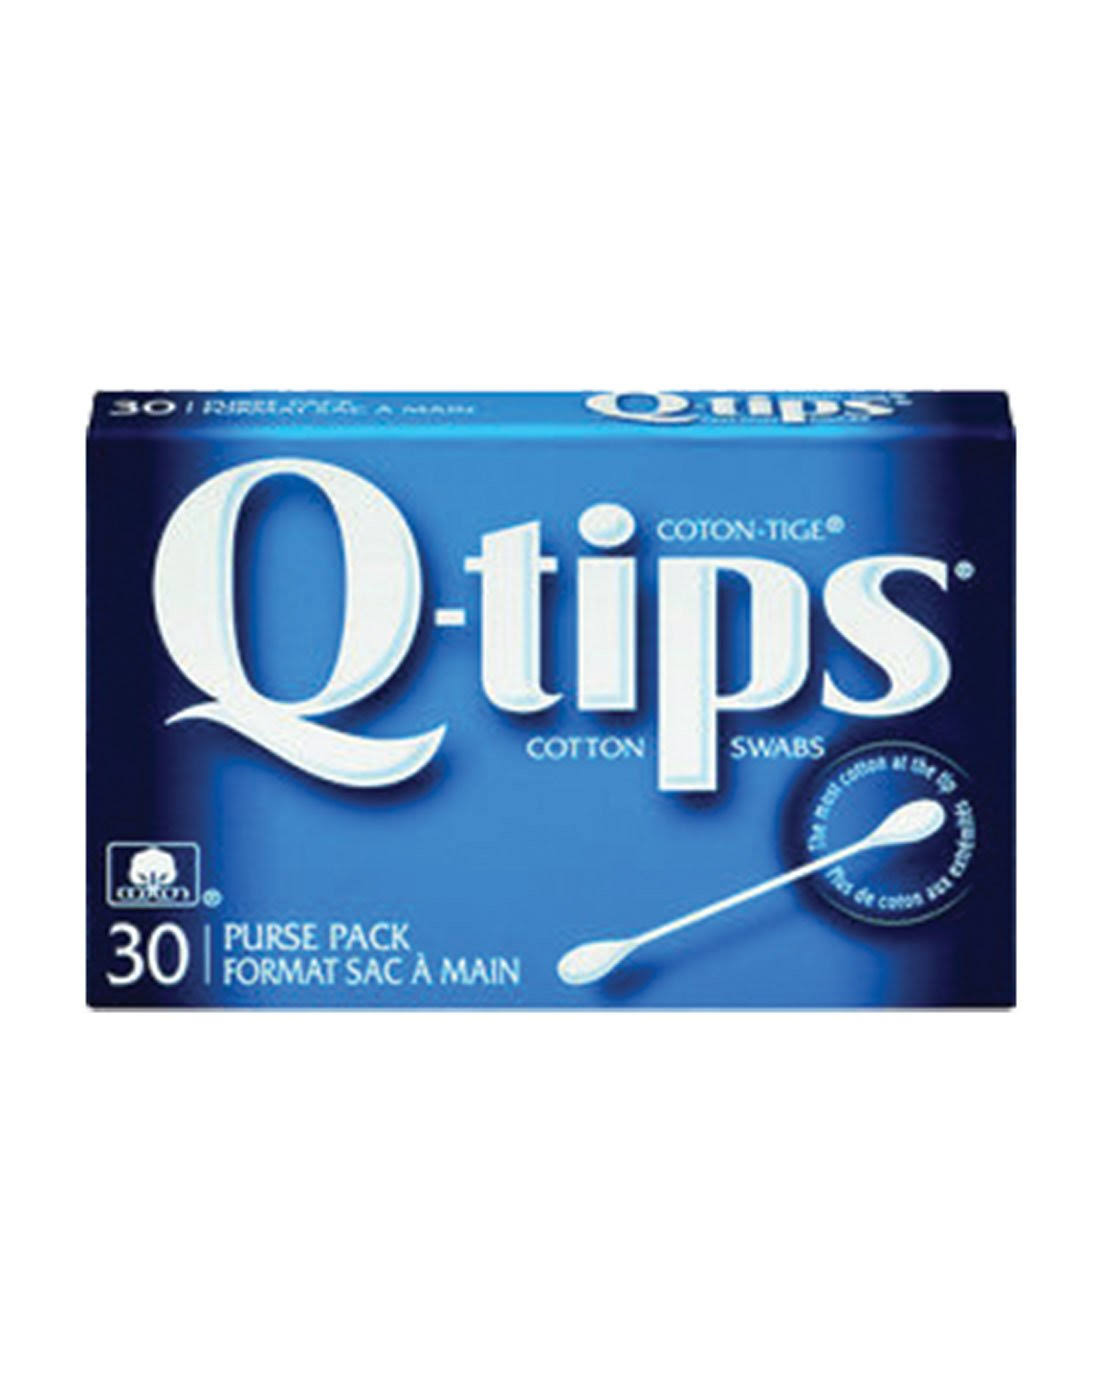 Q-tips Cotton Swabs - Travel Pack, 30ct